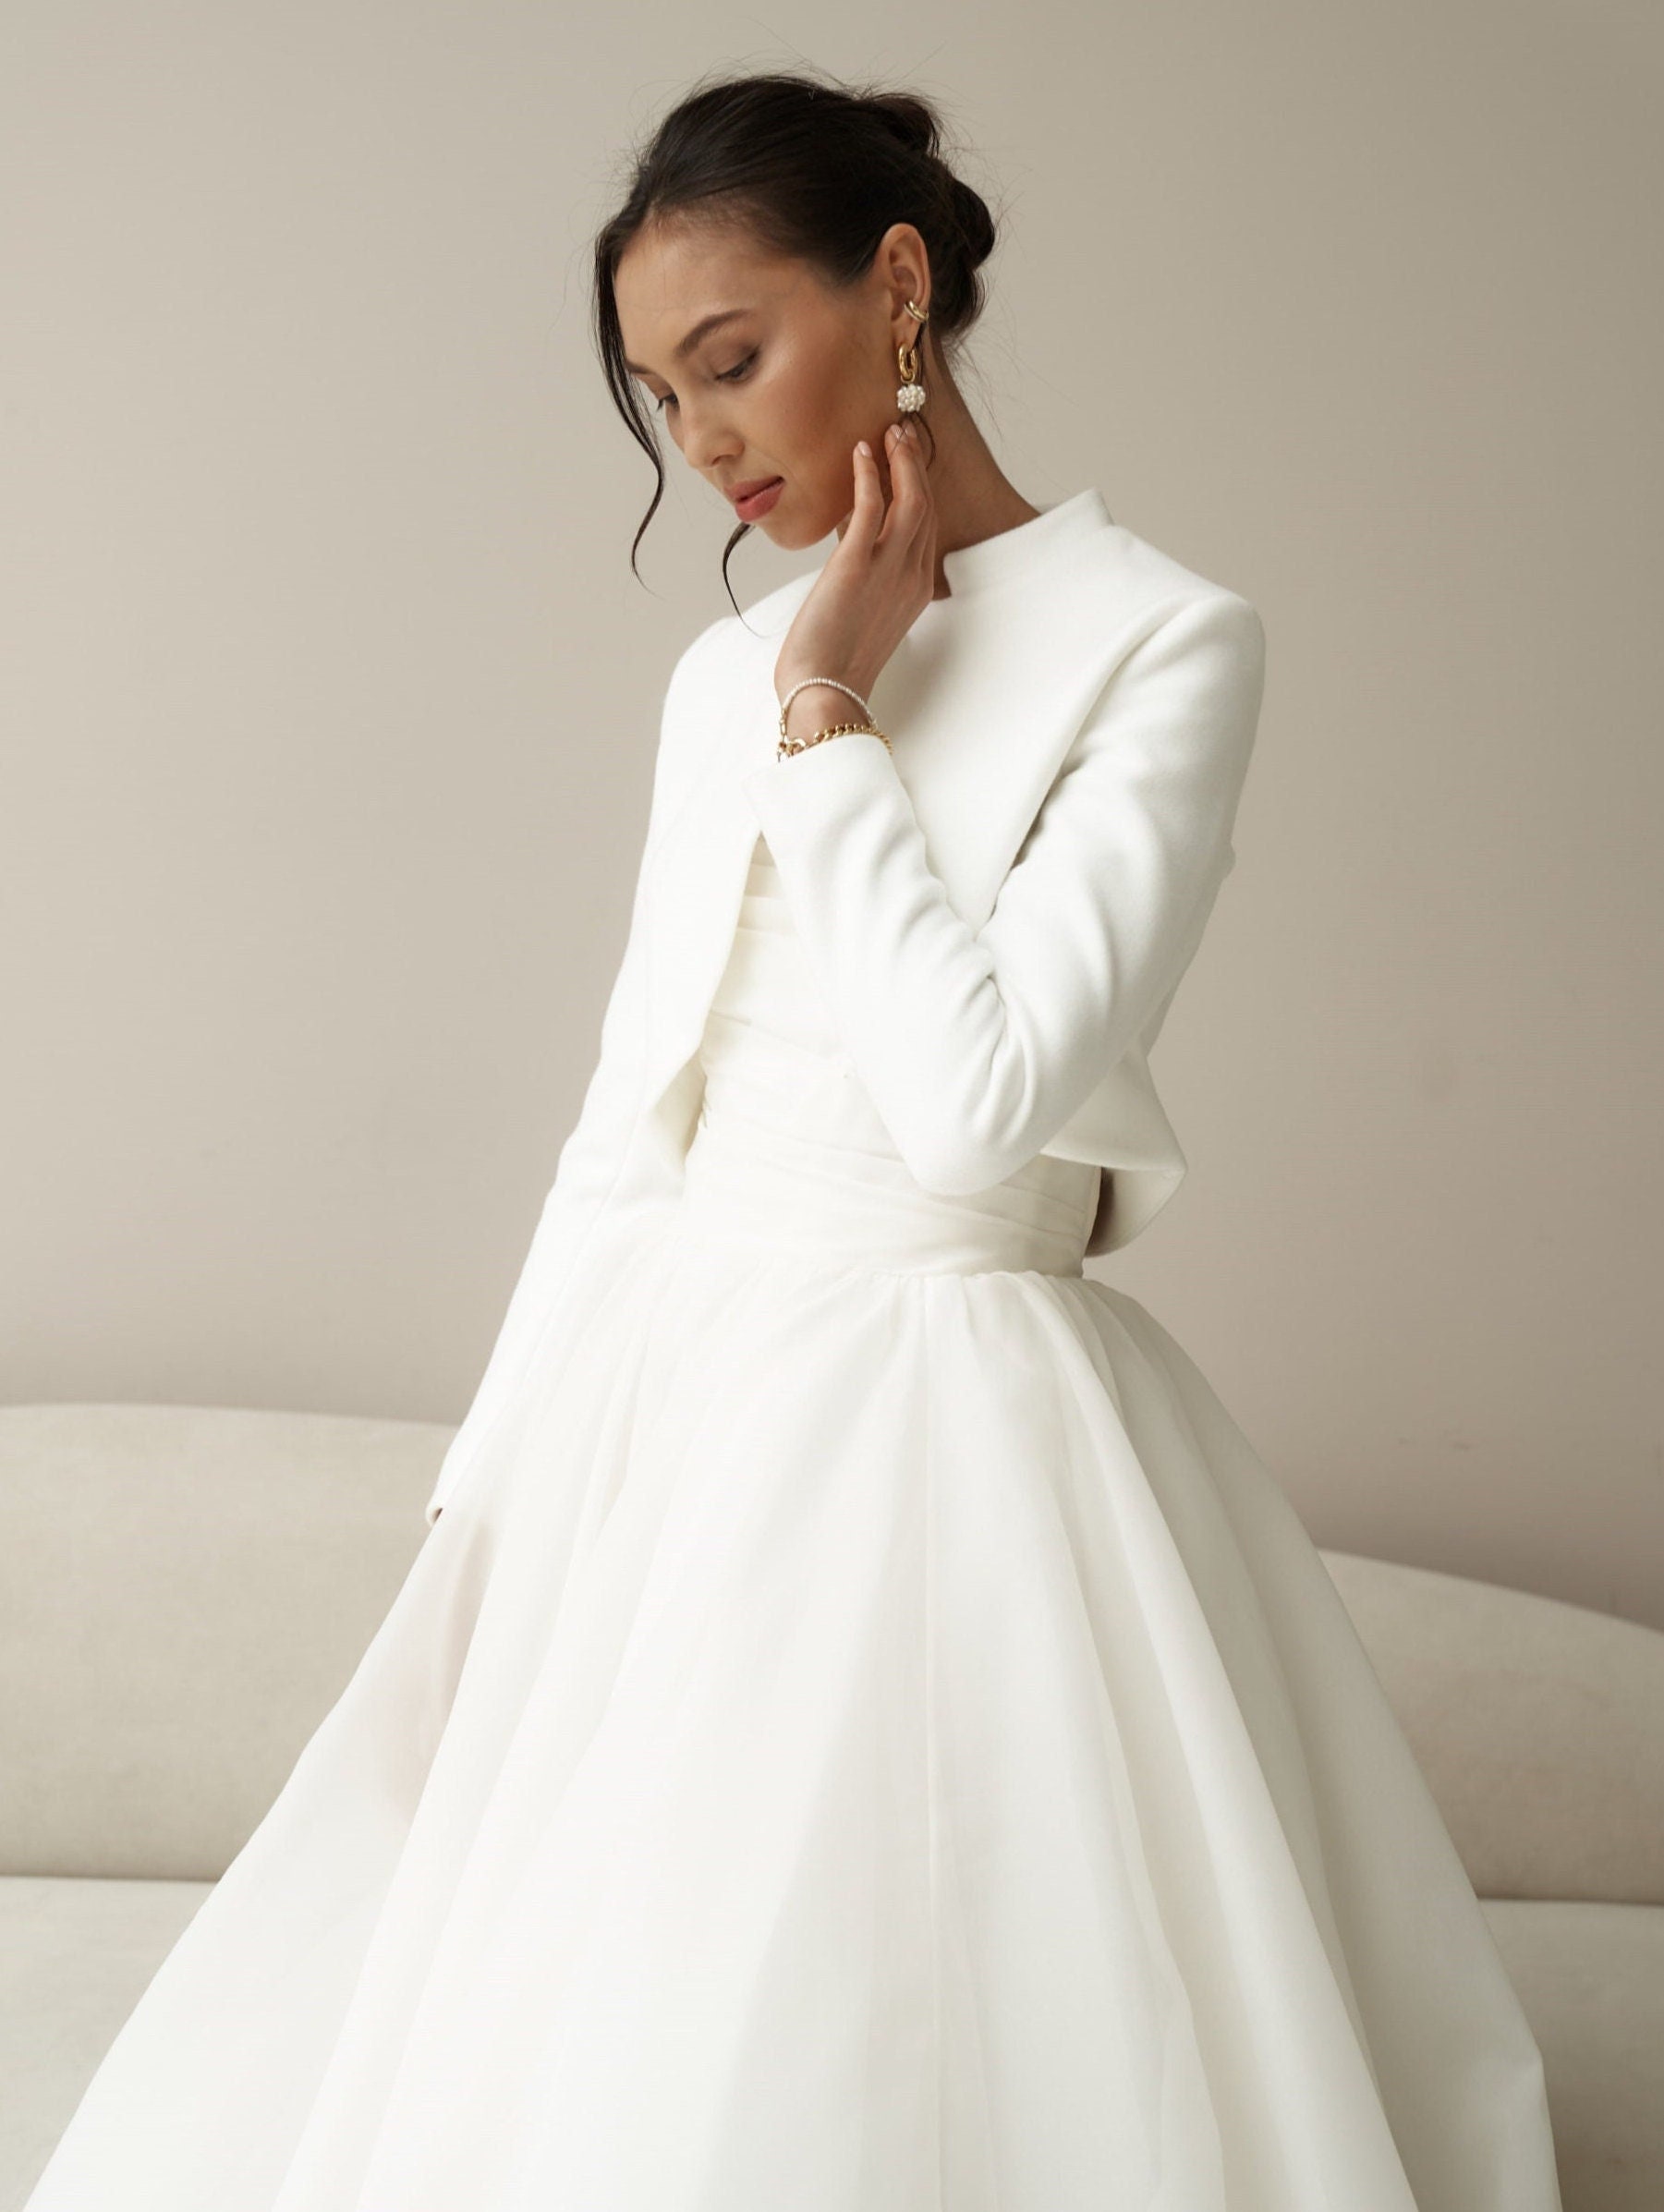 13 Beautiful Wedding Gowns Ideal for Delaware Ceremonies – Weddings Today